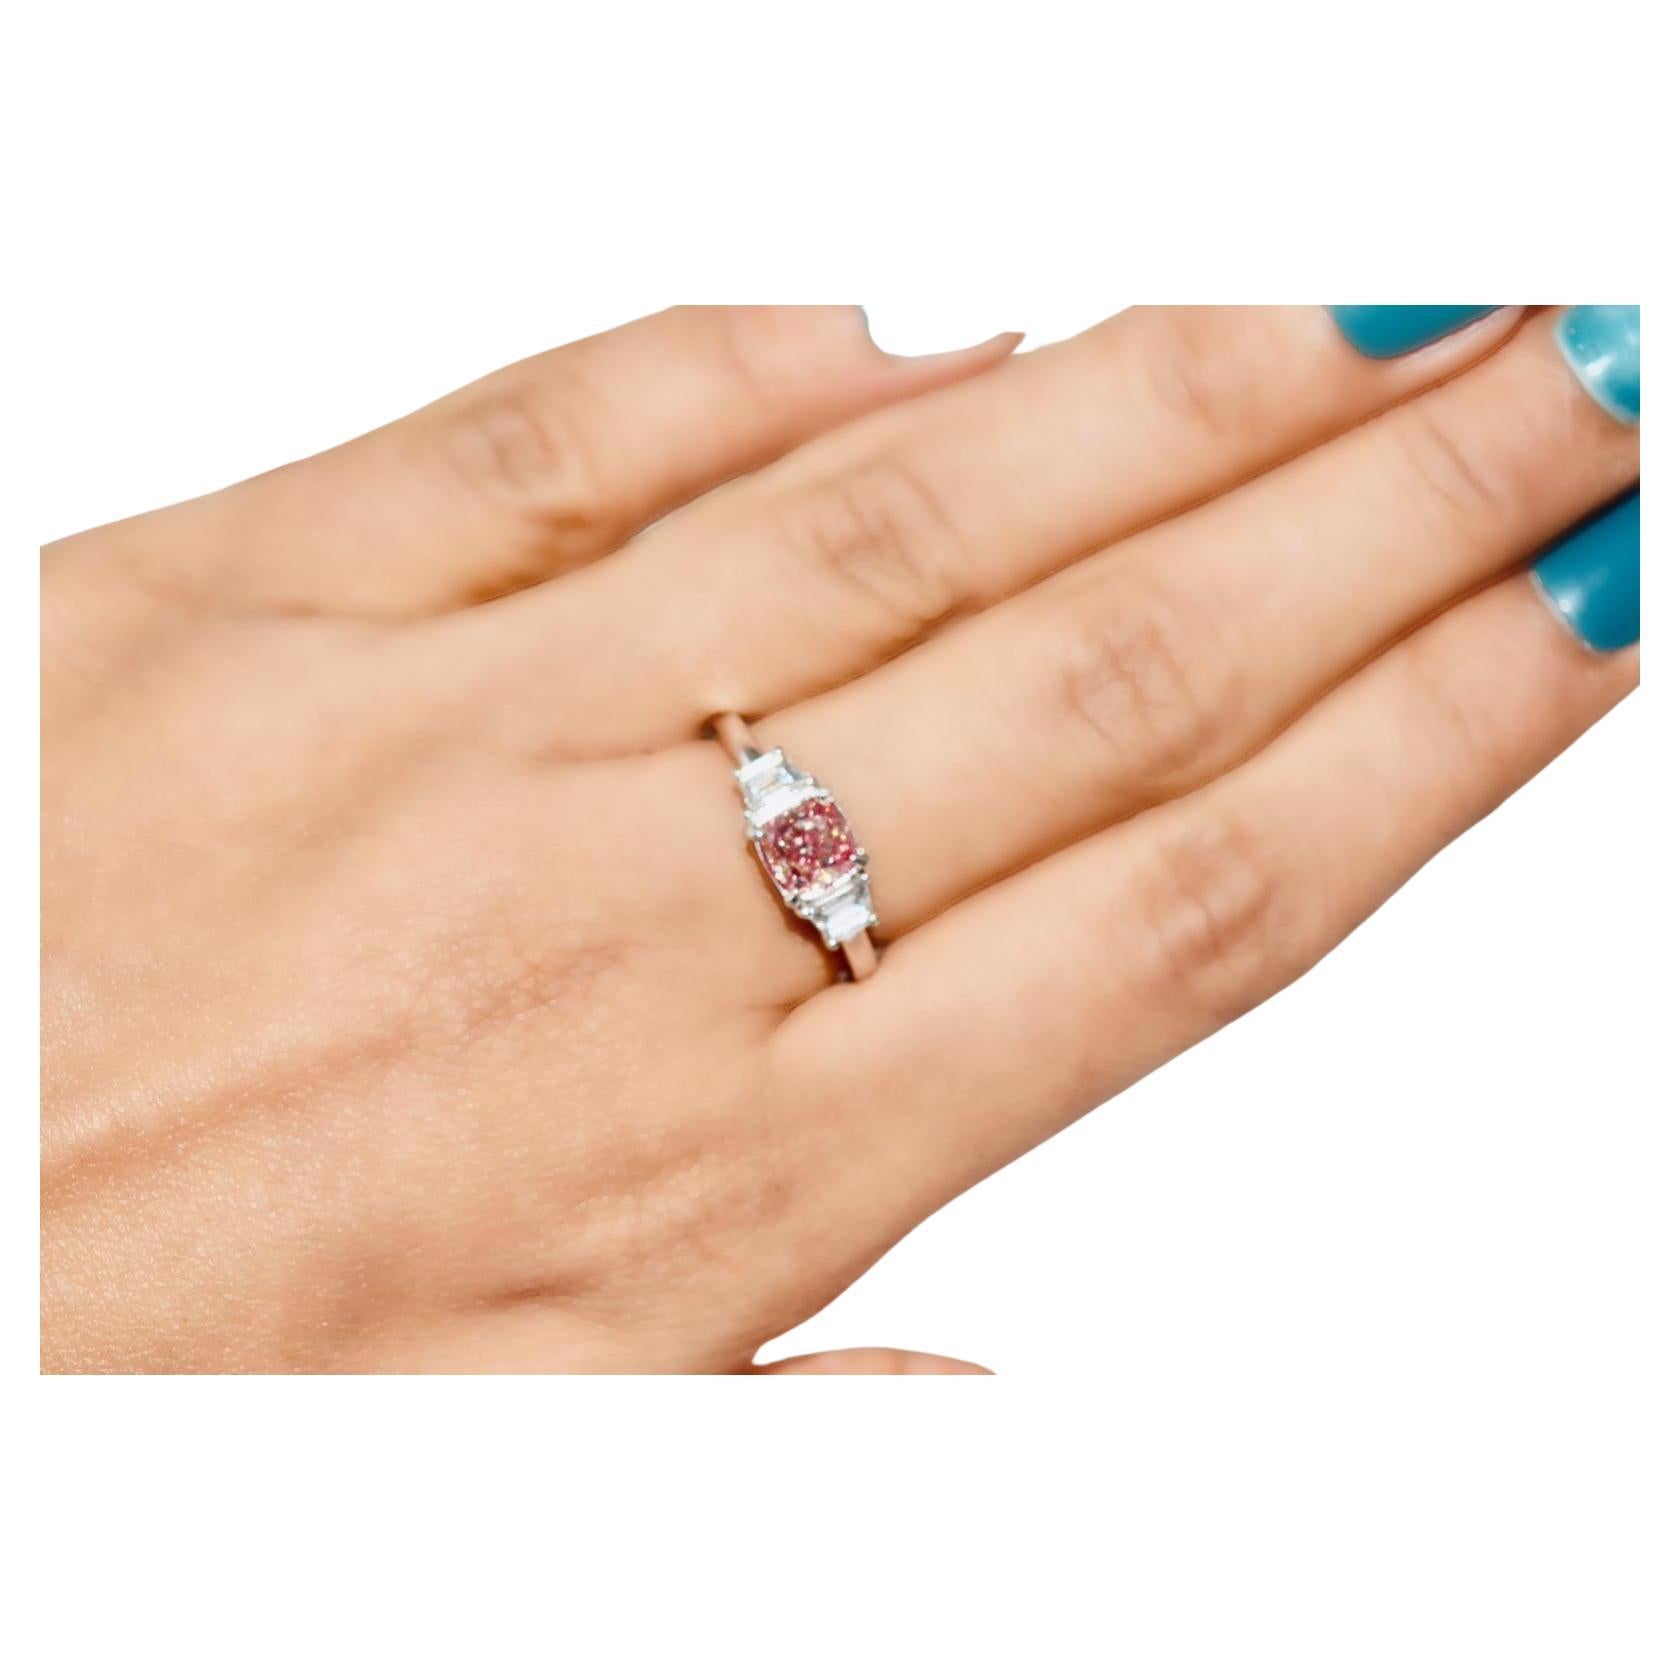 1.03 Carat Fancy Pink Diamond Ring VS Clarity AGL Certified For Sale